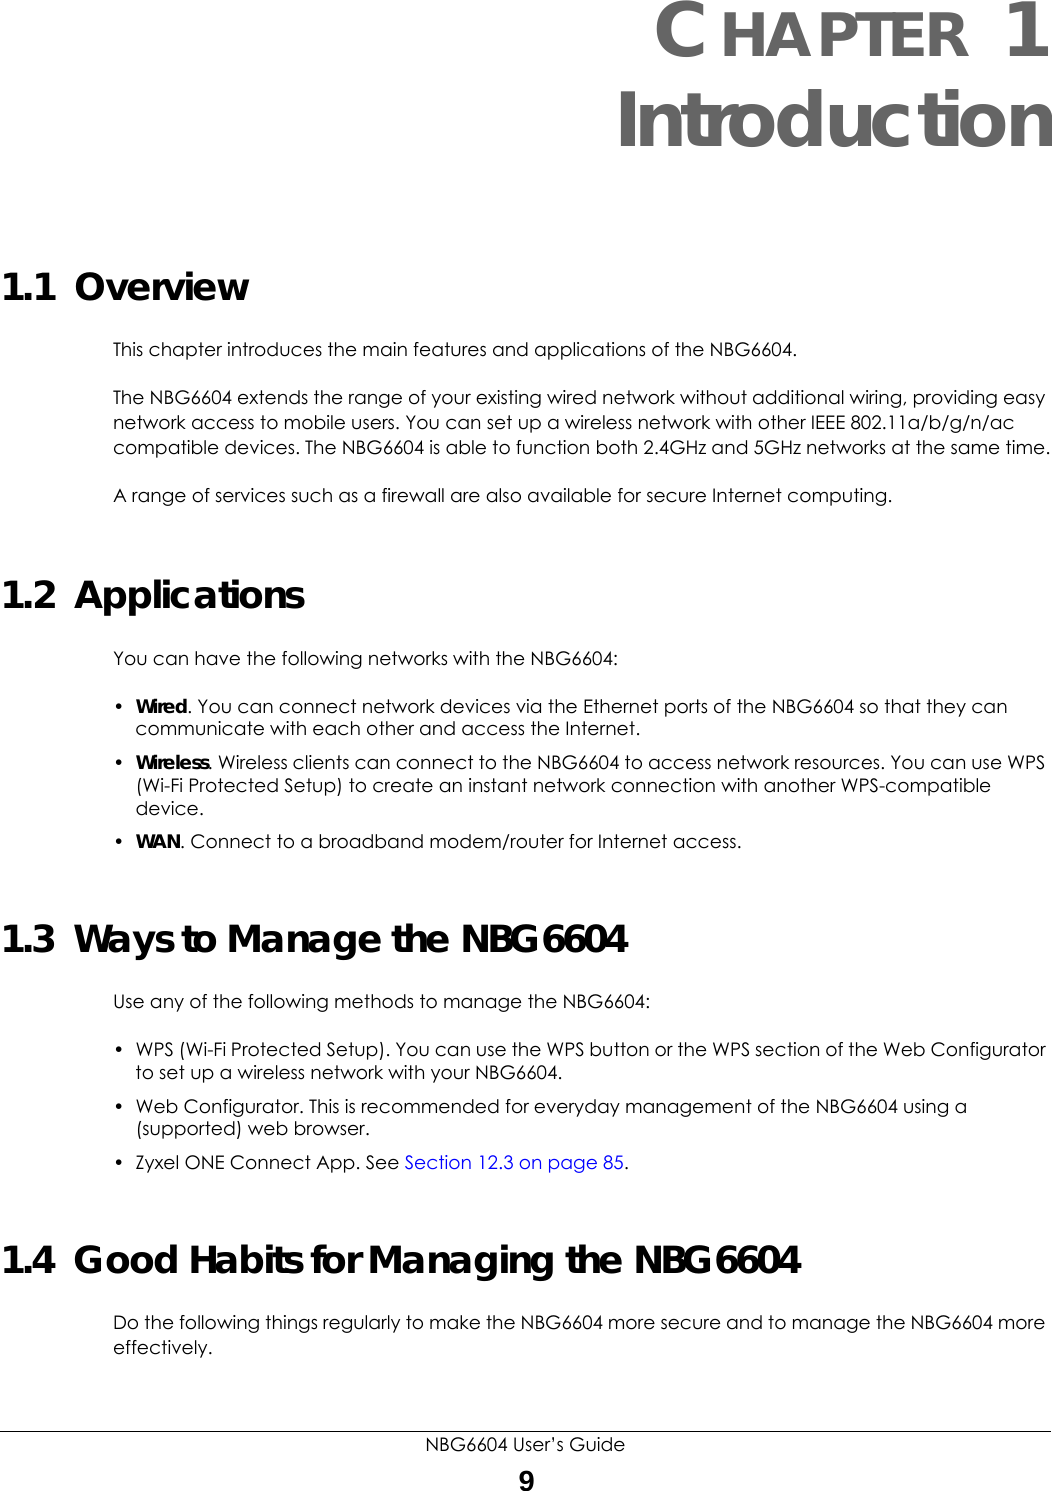 NBG6604 User’s Guide9CHAPTER 1 Introduction1.1  OverviewThis chapter introduces the main features and applications of the NBG6604.The NBG6604 extends the range of your existing wired network without additional wiring, providing easy network access to mobile users. You can set up a wireless network with other IEEE 802.11a/b/g/n/ac compatible devices. The NBG6604 is able to function both 2.4GHz and 5GHz networks at the same time.A range of services such as a firewall are also available for secure Internet computing. 1.2  ApplicationsYou can have the following networks with the NBG6604:•Wired. You can connect network devices via the Ethernet ports of the NBG6604 so that they can communicate with each other and access the Internet.•Wireless. Wireless clients can connect to the NBG6604 to access network resources. You can use WPS (Wi-Fi Protected Setup) to create an instant network connection with another WPS-compatible device.•WAN. Connect to a broadband modem/router for Internet access.1.3  Ways to Manage the NBG6604Use any of the following methods to manage the NBG6604:• WPS (Wi-Fi Protected Setup). You can use the WPS button or the WPS section of the Web Configurator to set up a wireless network with your NBG6604.• Web Configurator. This is recommended for everyday management of the NBG6604 using a (supported) web browser.• Zyxel ONE Connect App. See Section 12.3 on page 85.1.4  Good Habits for Managing the NBG6604Do the following things regularly to make the NBG6604 more secure and to manage the NBG6604 more effectively.